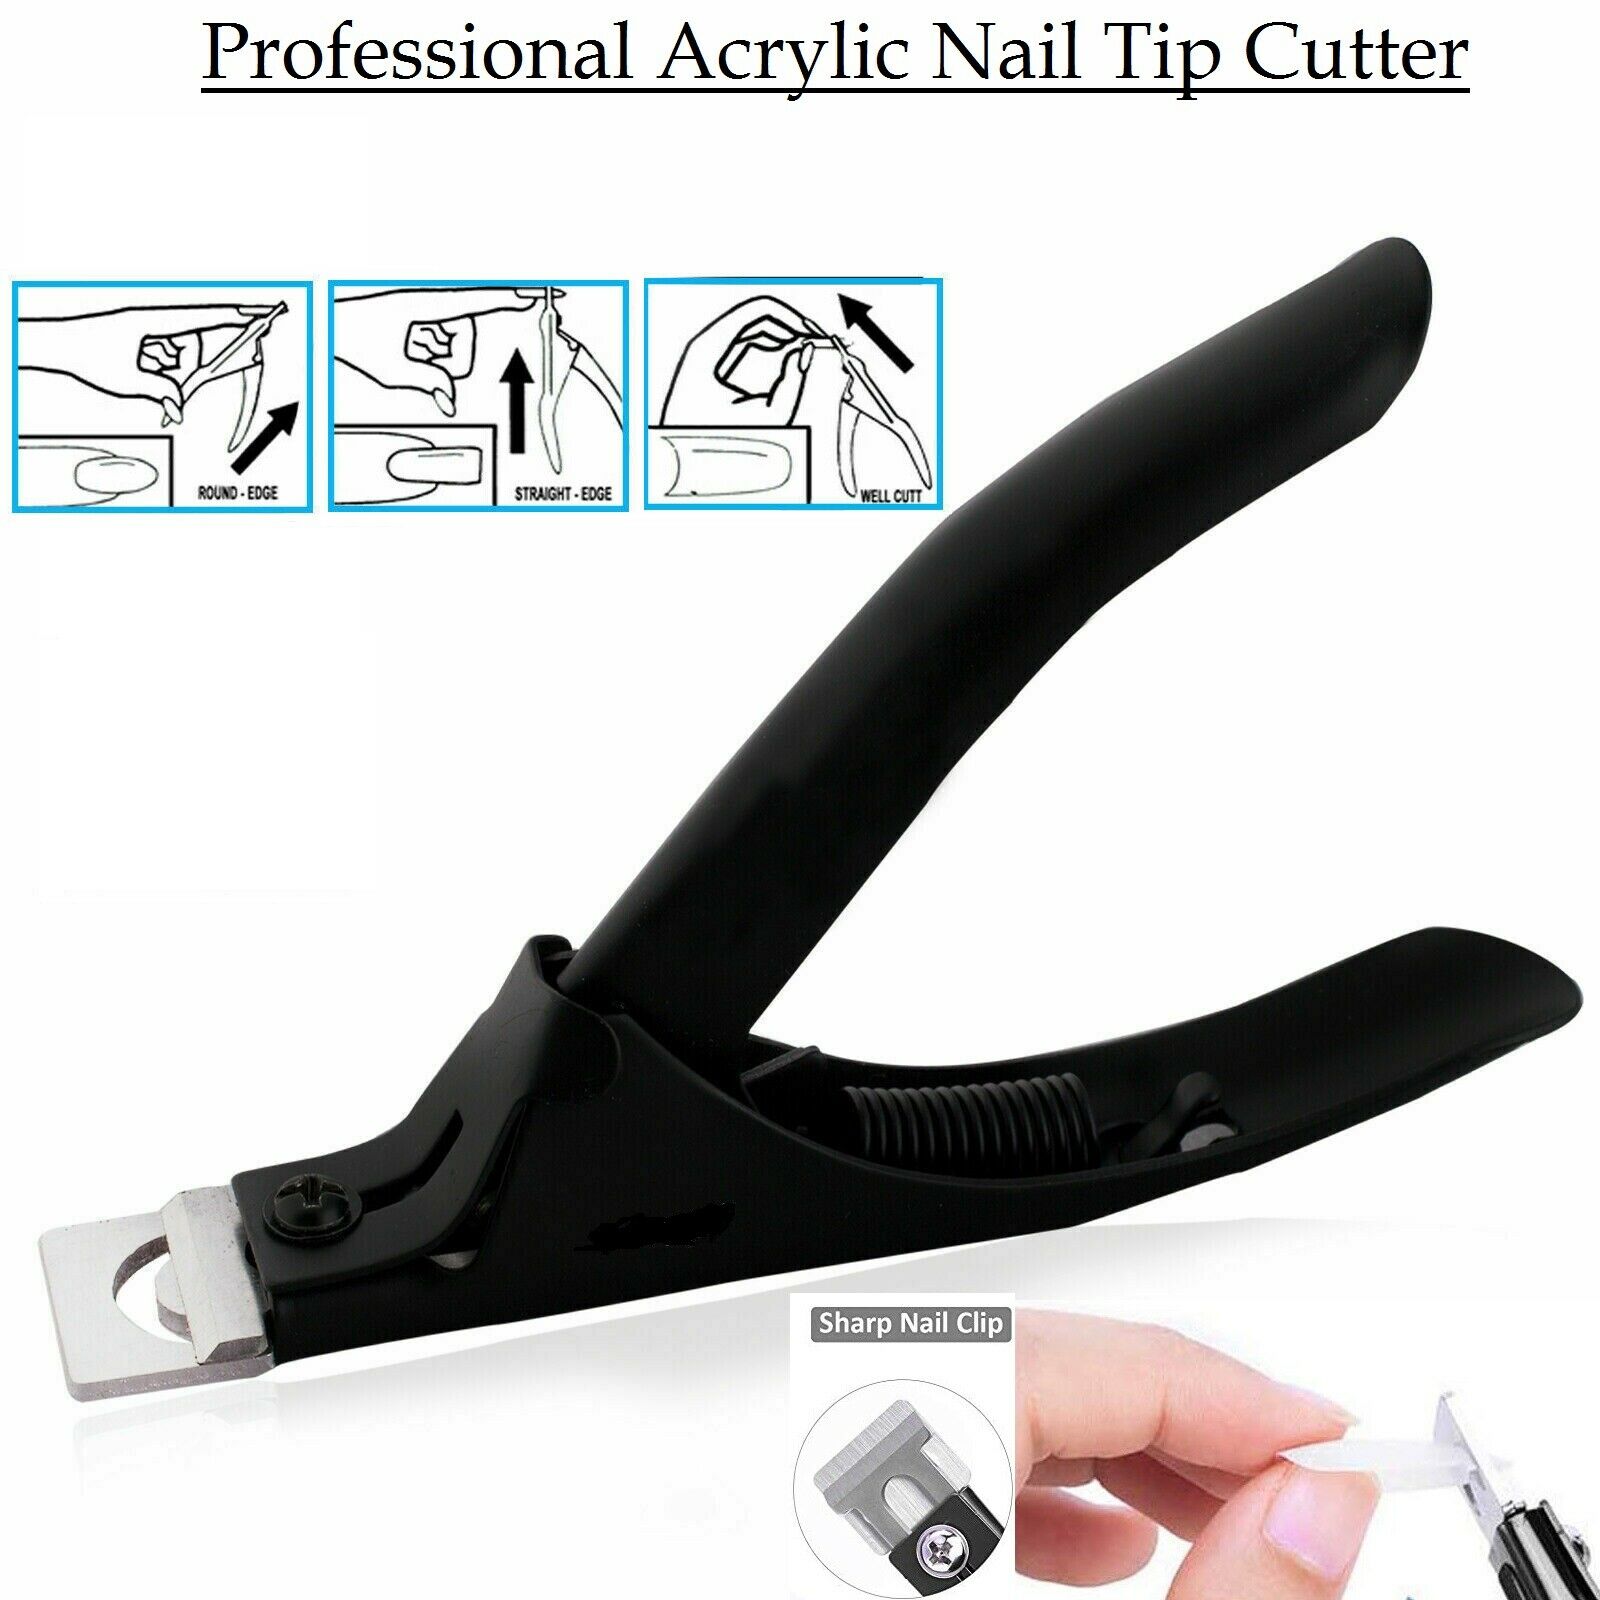 Professional Nail Cutter - Curved Blade | MyFootShop.com